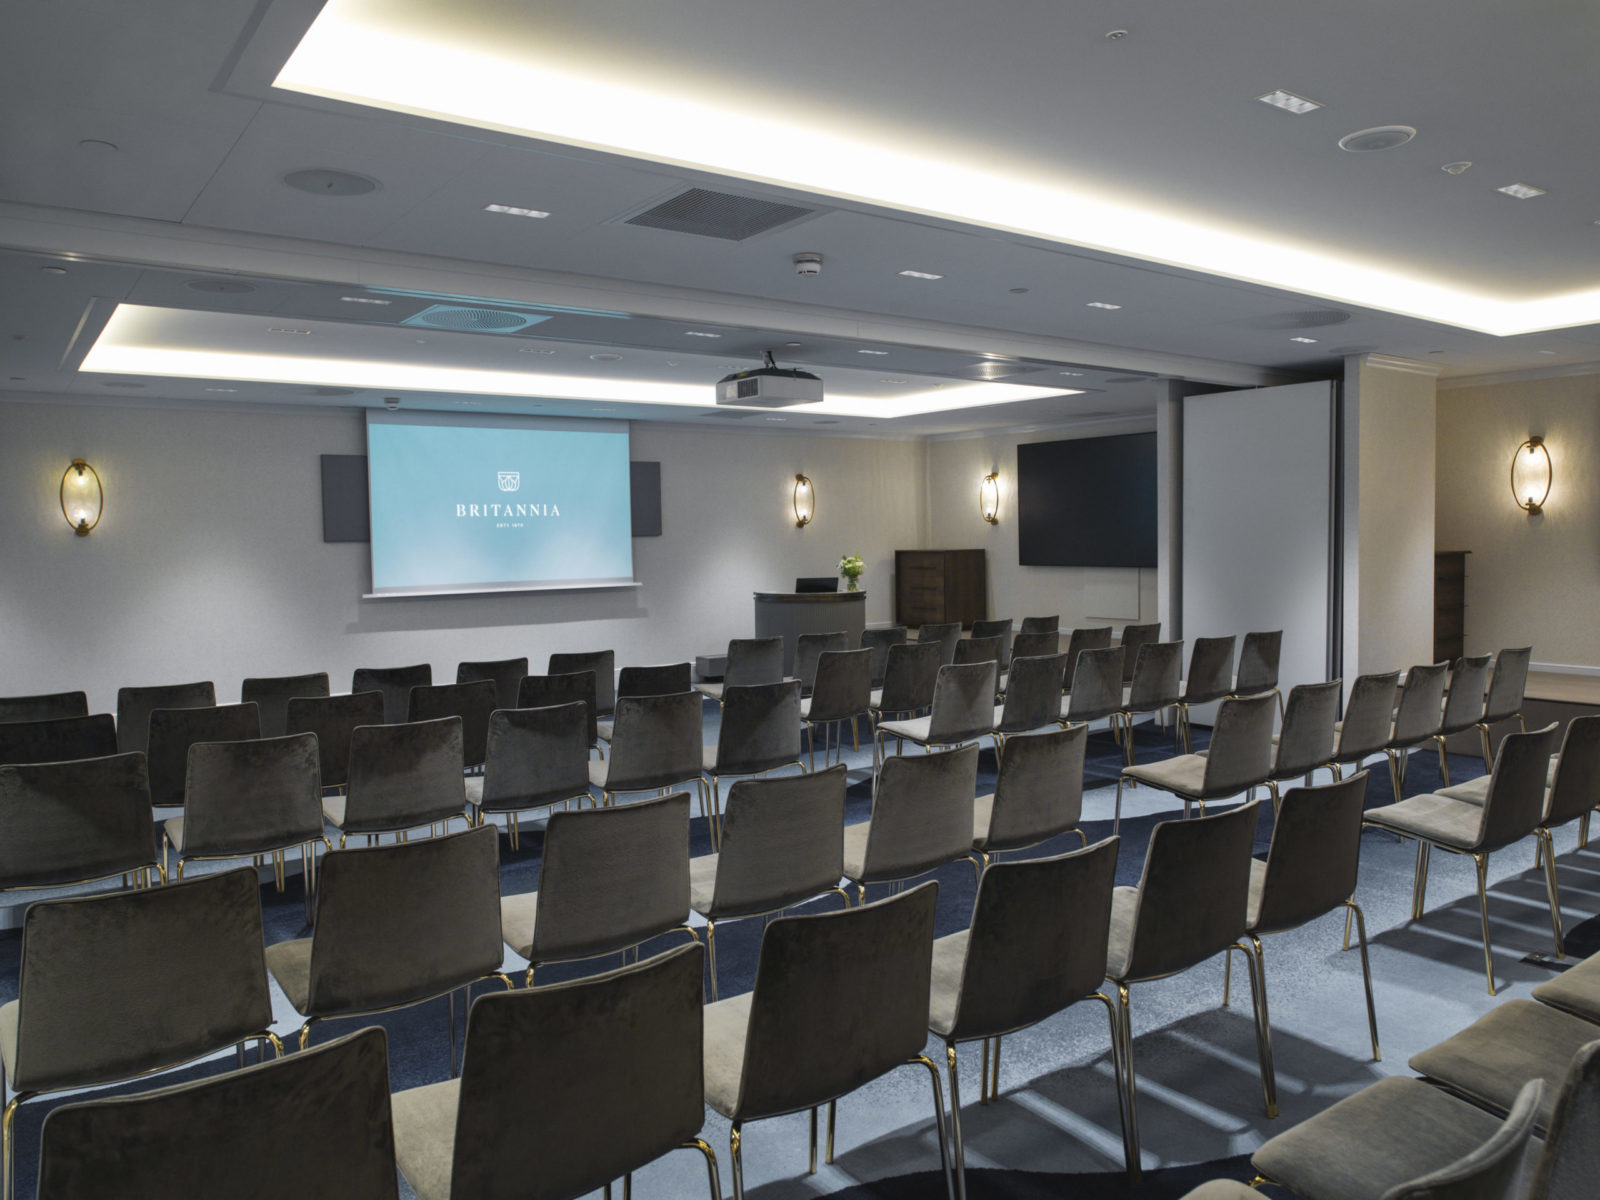 Britannia Hotel conference room with theatre seating